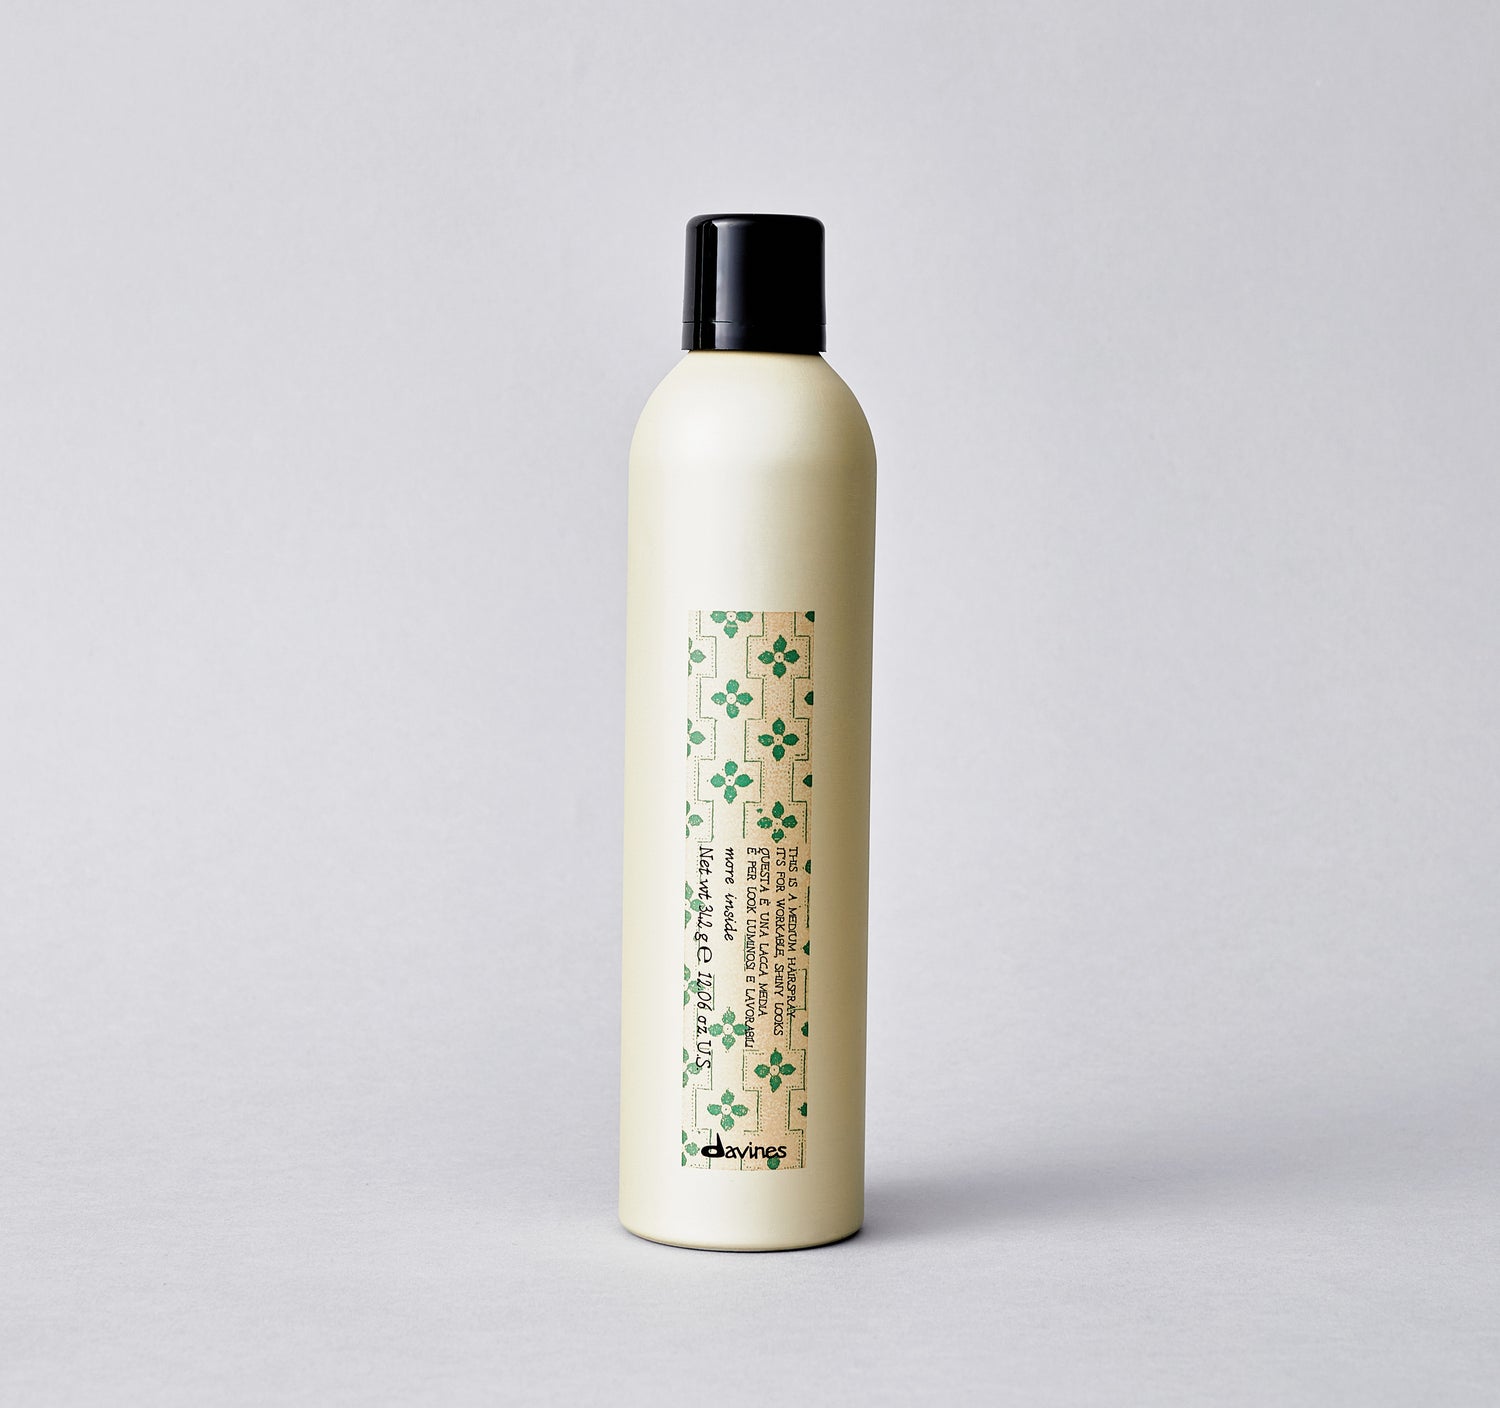 The Medium Hairspray is designed for long-lasting styles. It eliminates frizz, adds structure and provides hold without leaving residue. It is easy to work with and brush out.